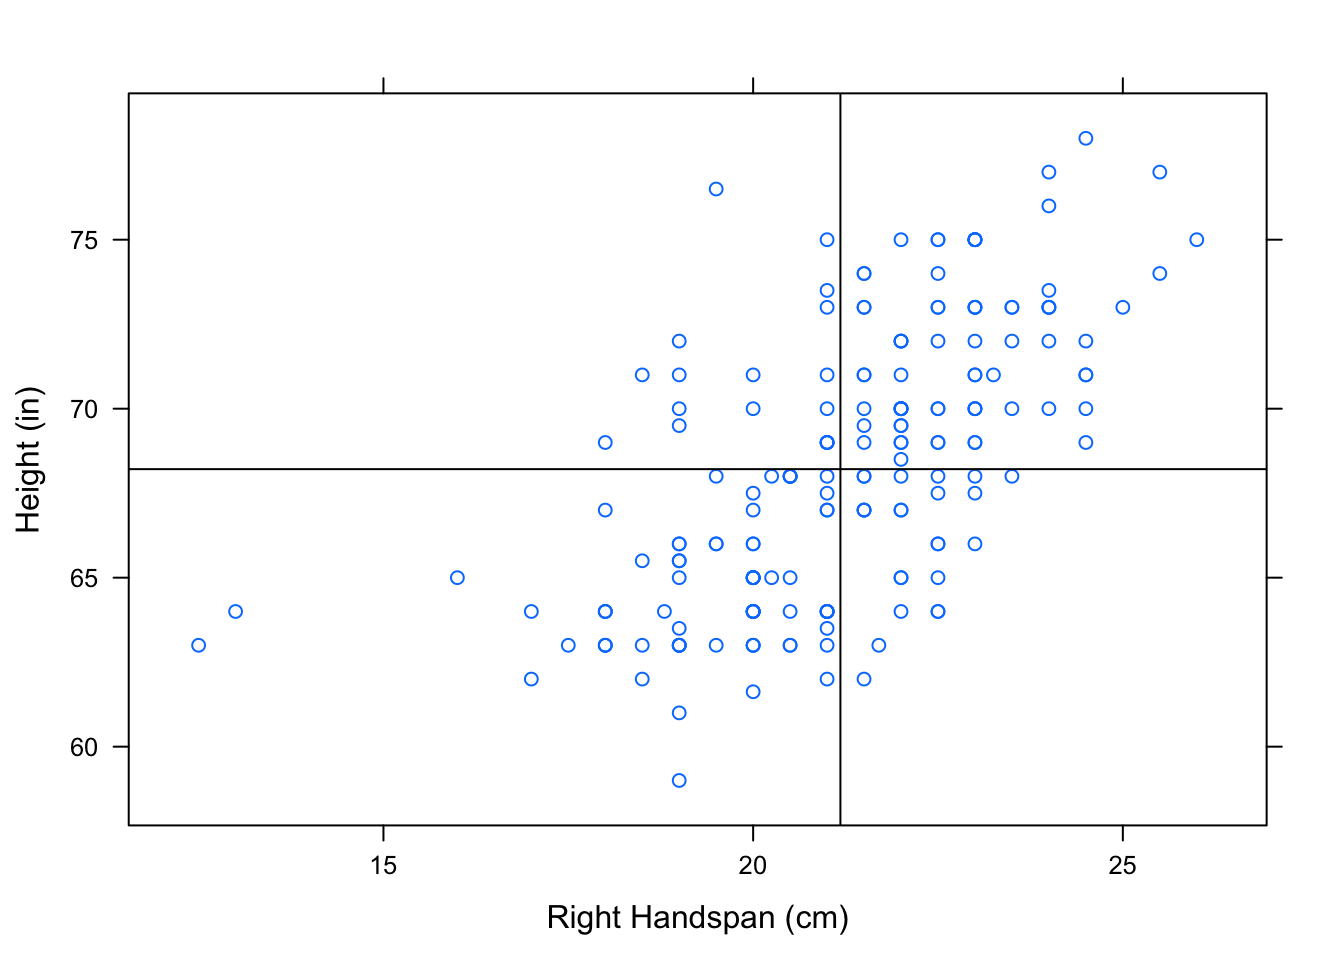 Four Boxes.  Scatterplot of Right Handspan (cm) versus Height (in).  The lines marking the mean of the handspans and the mean of the heights have been plotted to break the scatterplot into four boxes.